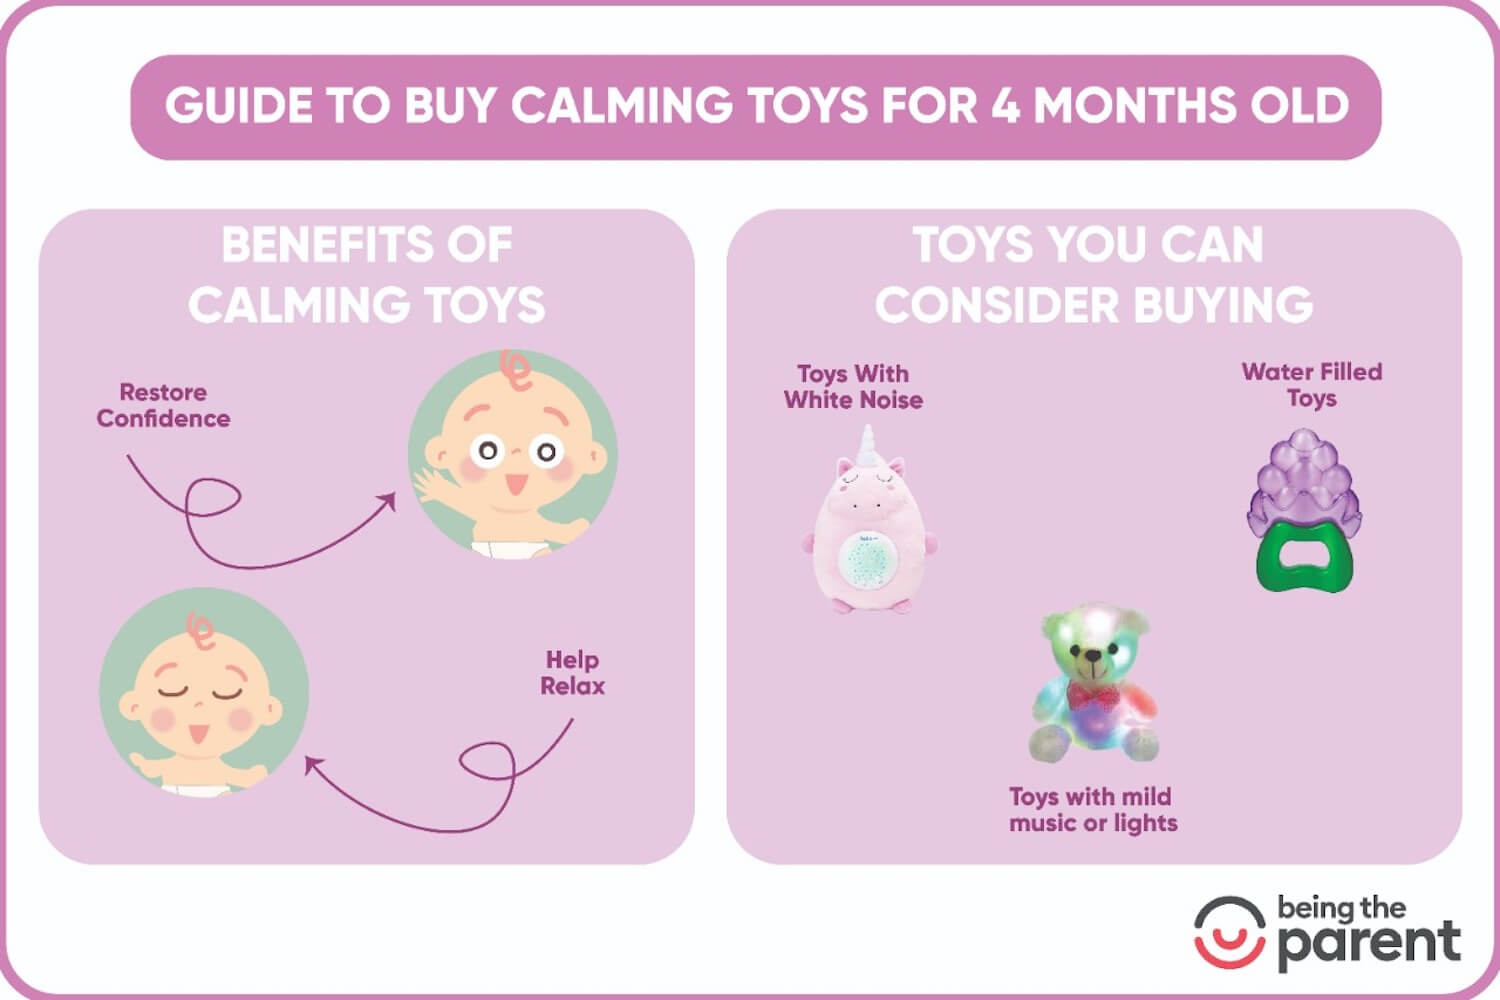 Calming toys for 4 month old